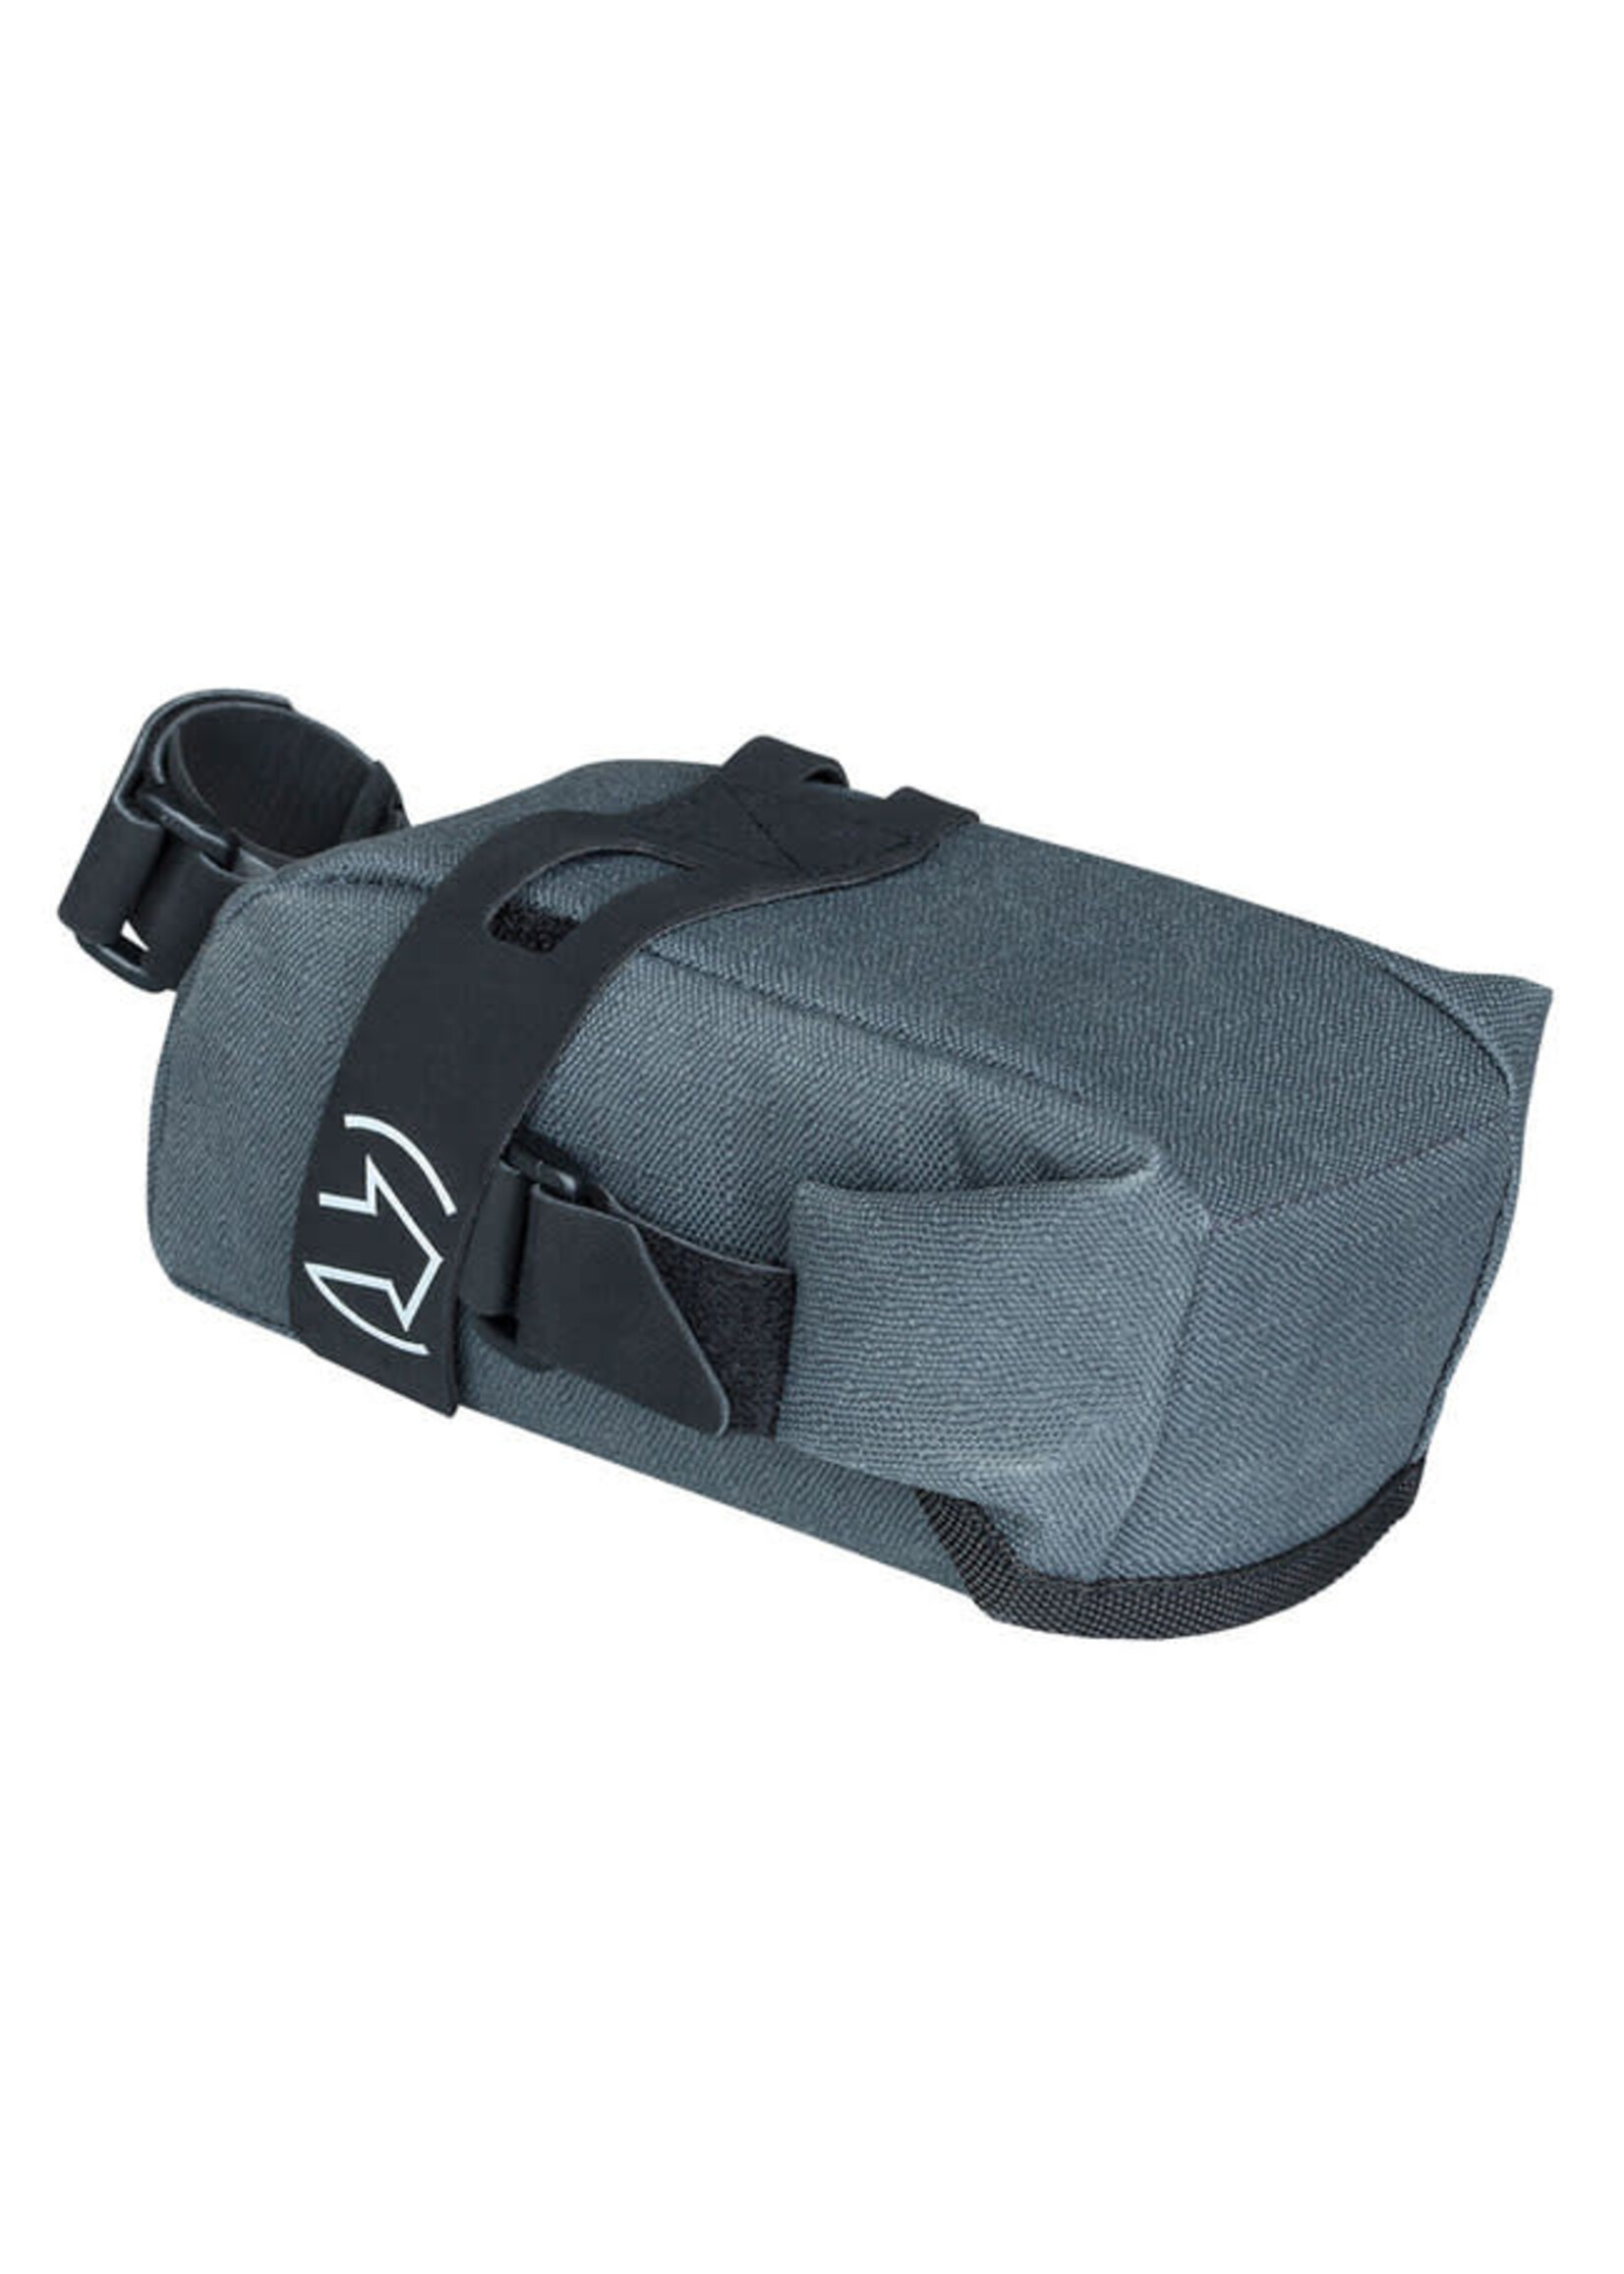 PRO Bags DISCOVER GRAVEL SEATBAG TOOL PACK - .6L